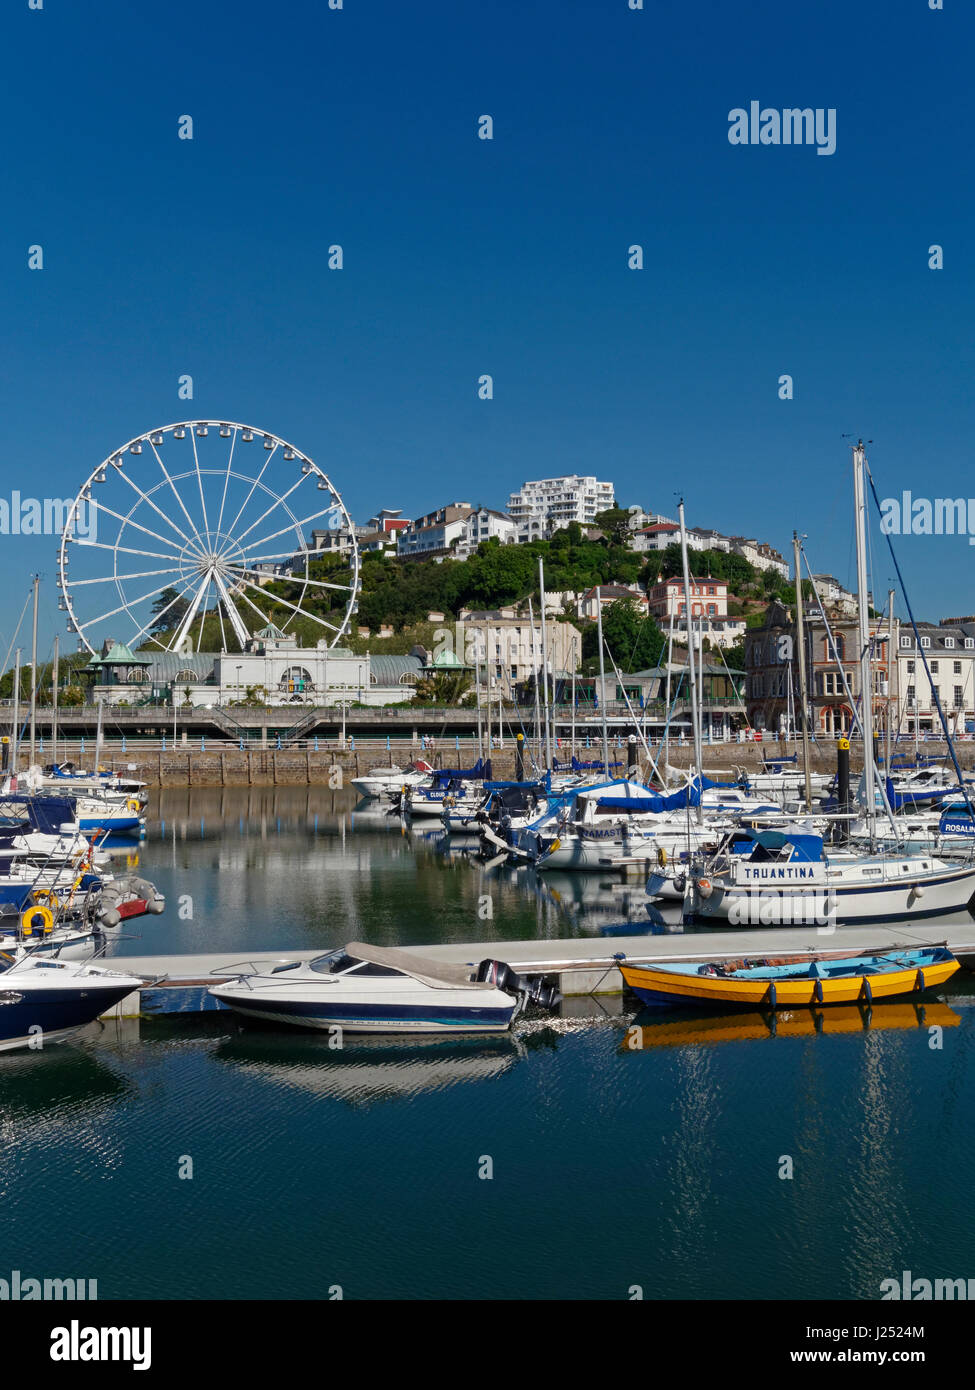 Torquay on The English Riviera with its Harbour with Big Wheel, Torquay, Devon, England, UK Stock Photo